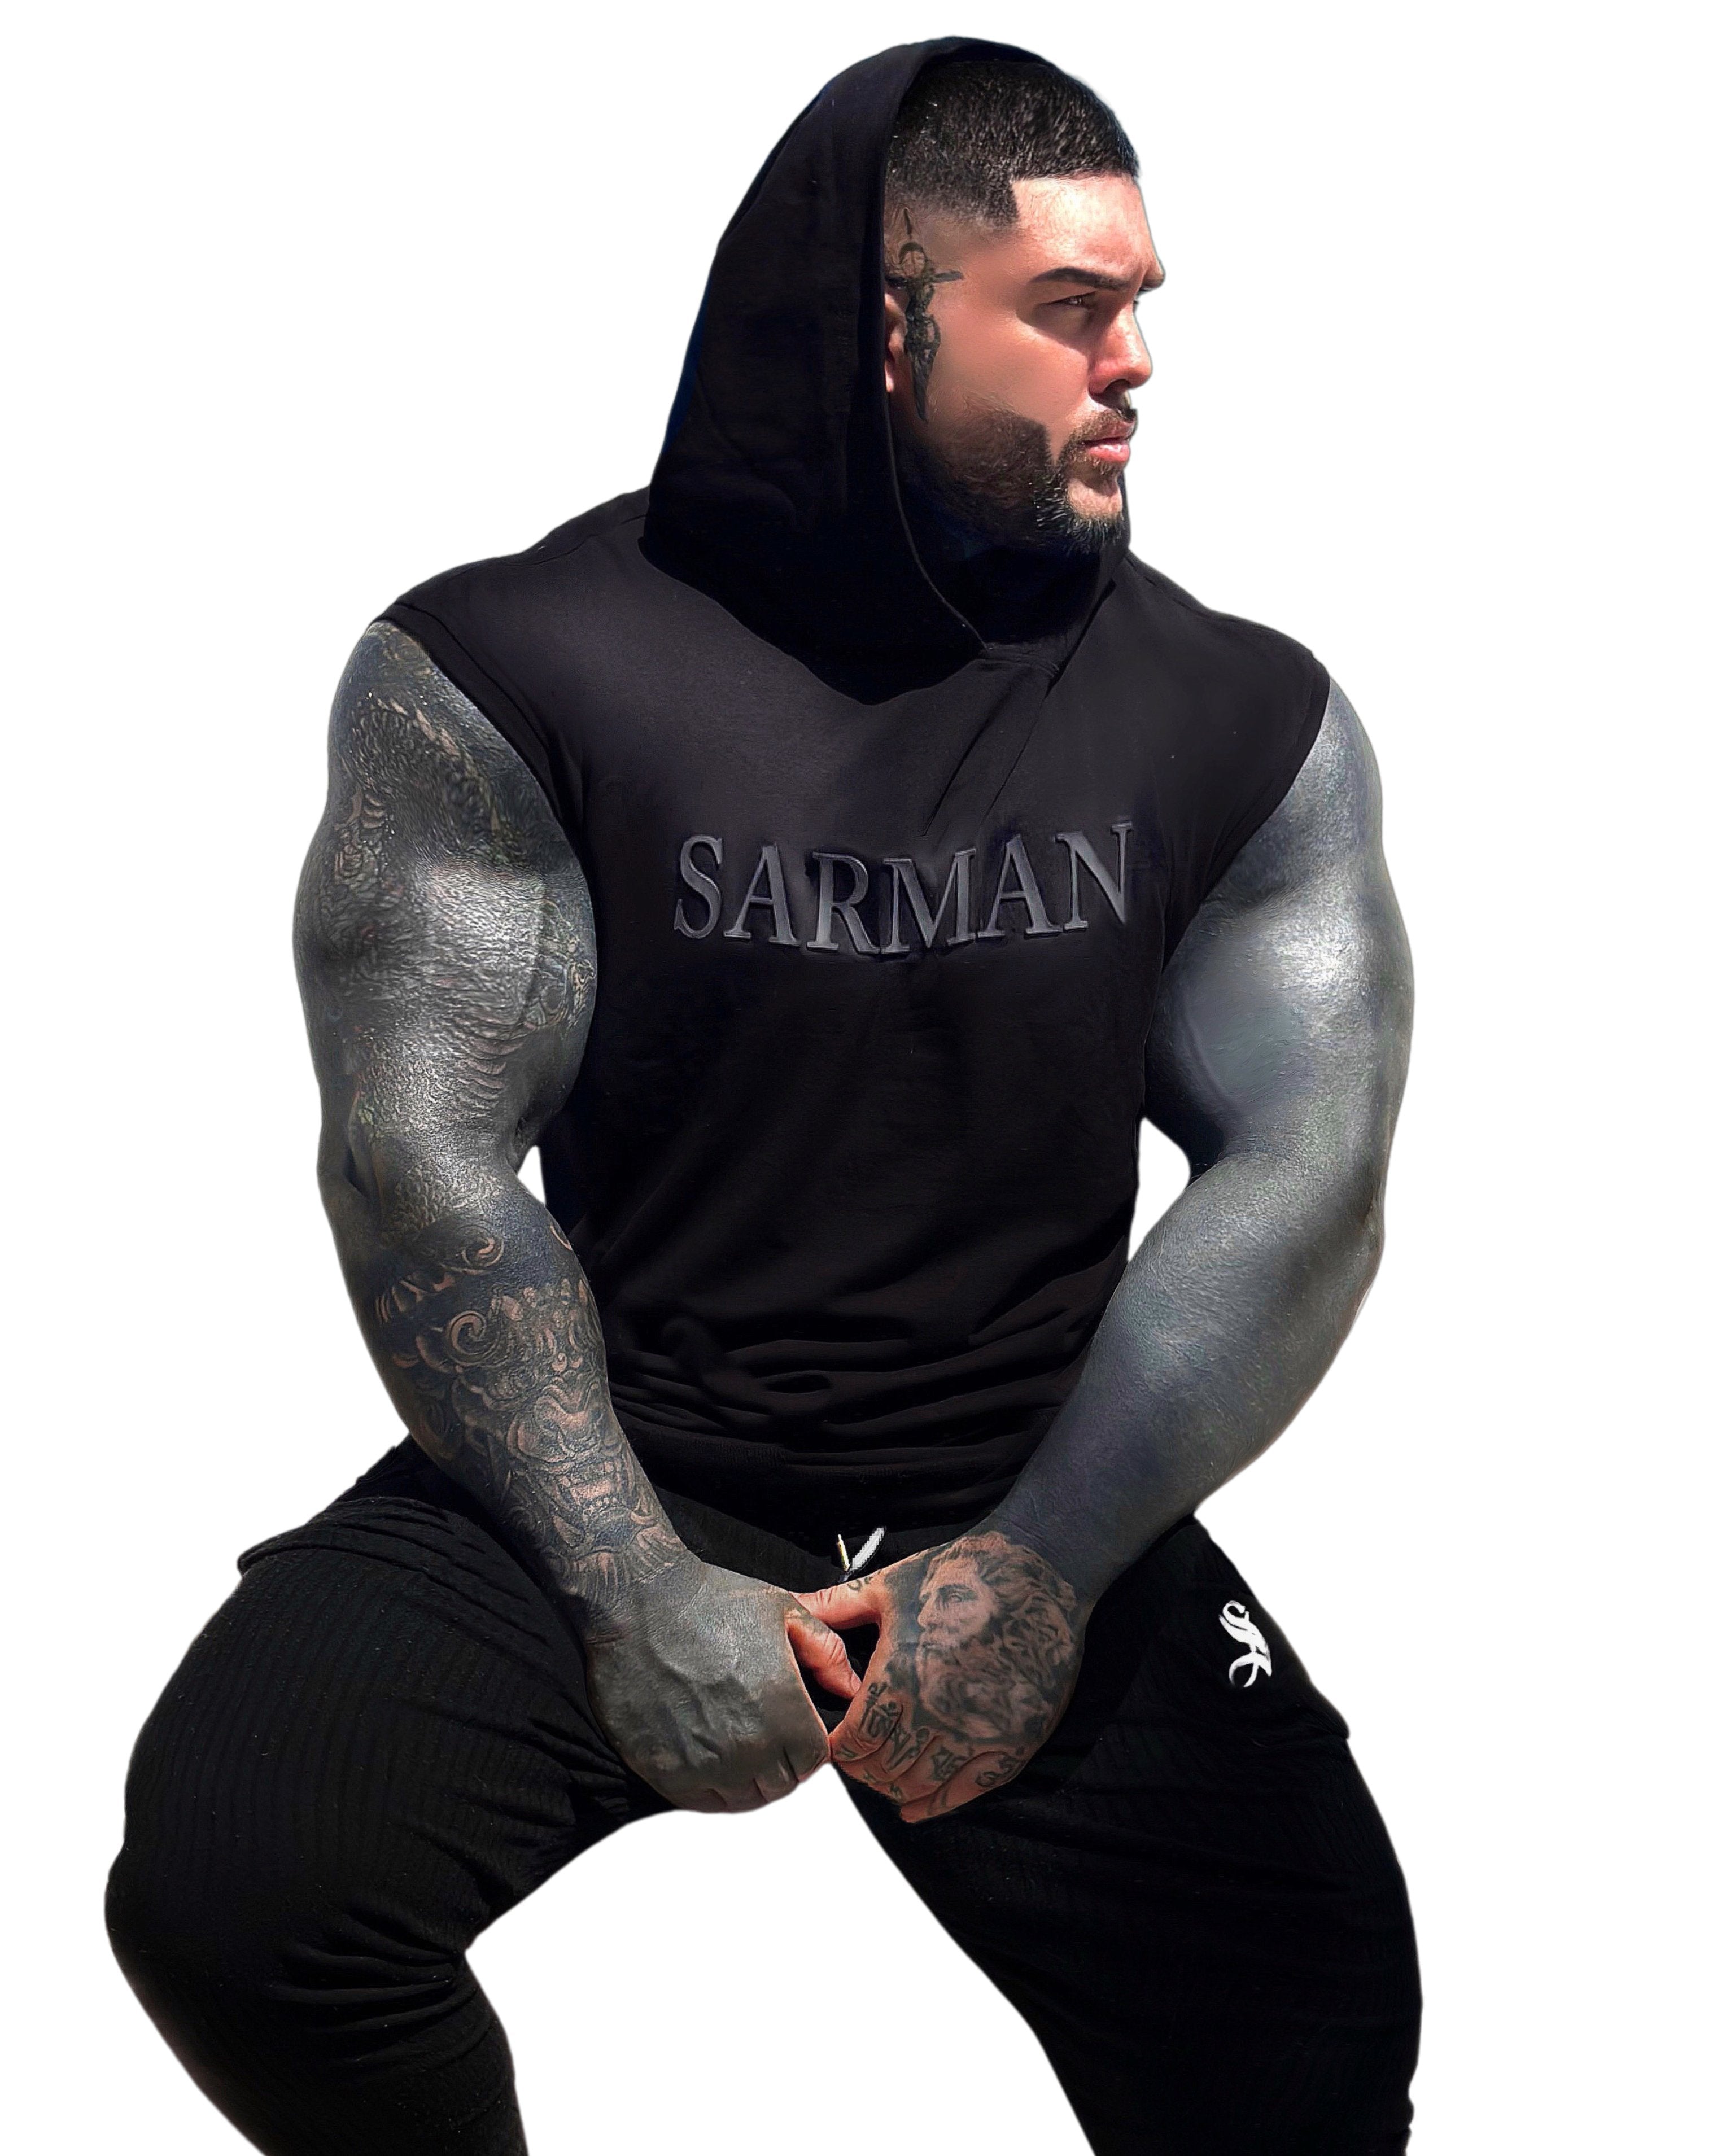 Lumber - Black T-shirt for Men - Sarman Fashion - Wholesale Clothing Fashion Brand for Men from Canada